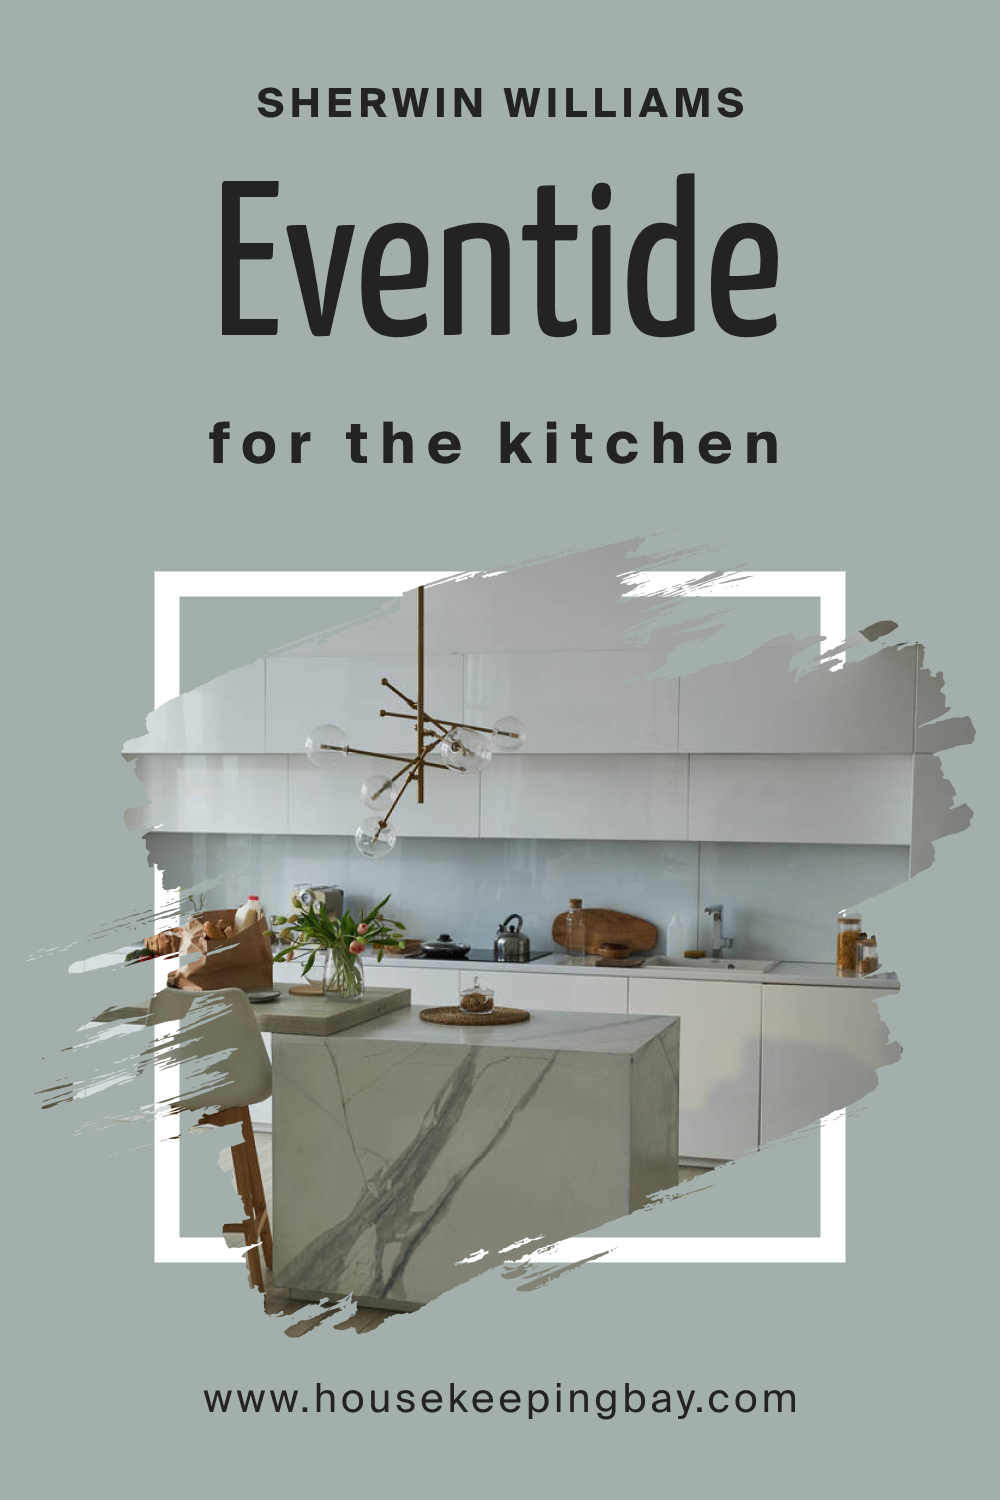 Sherwin Williams. SW 9643 Eventide For the Kitchens